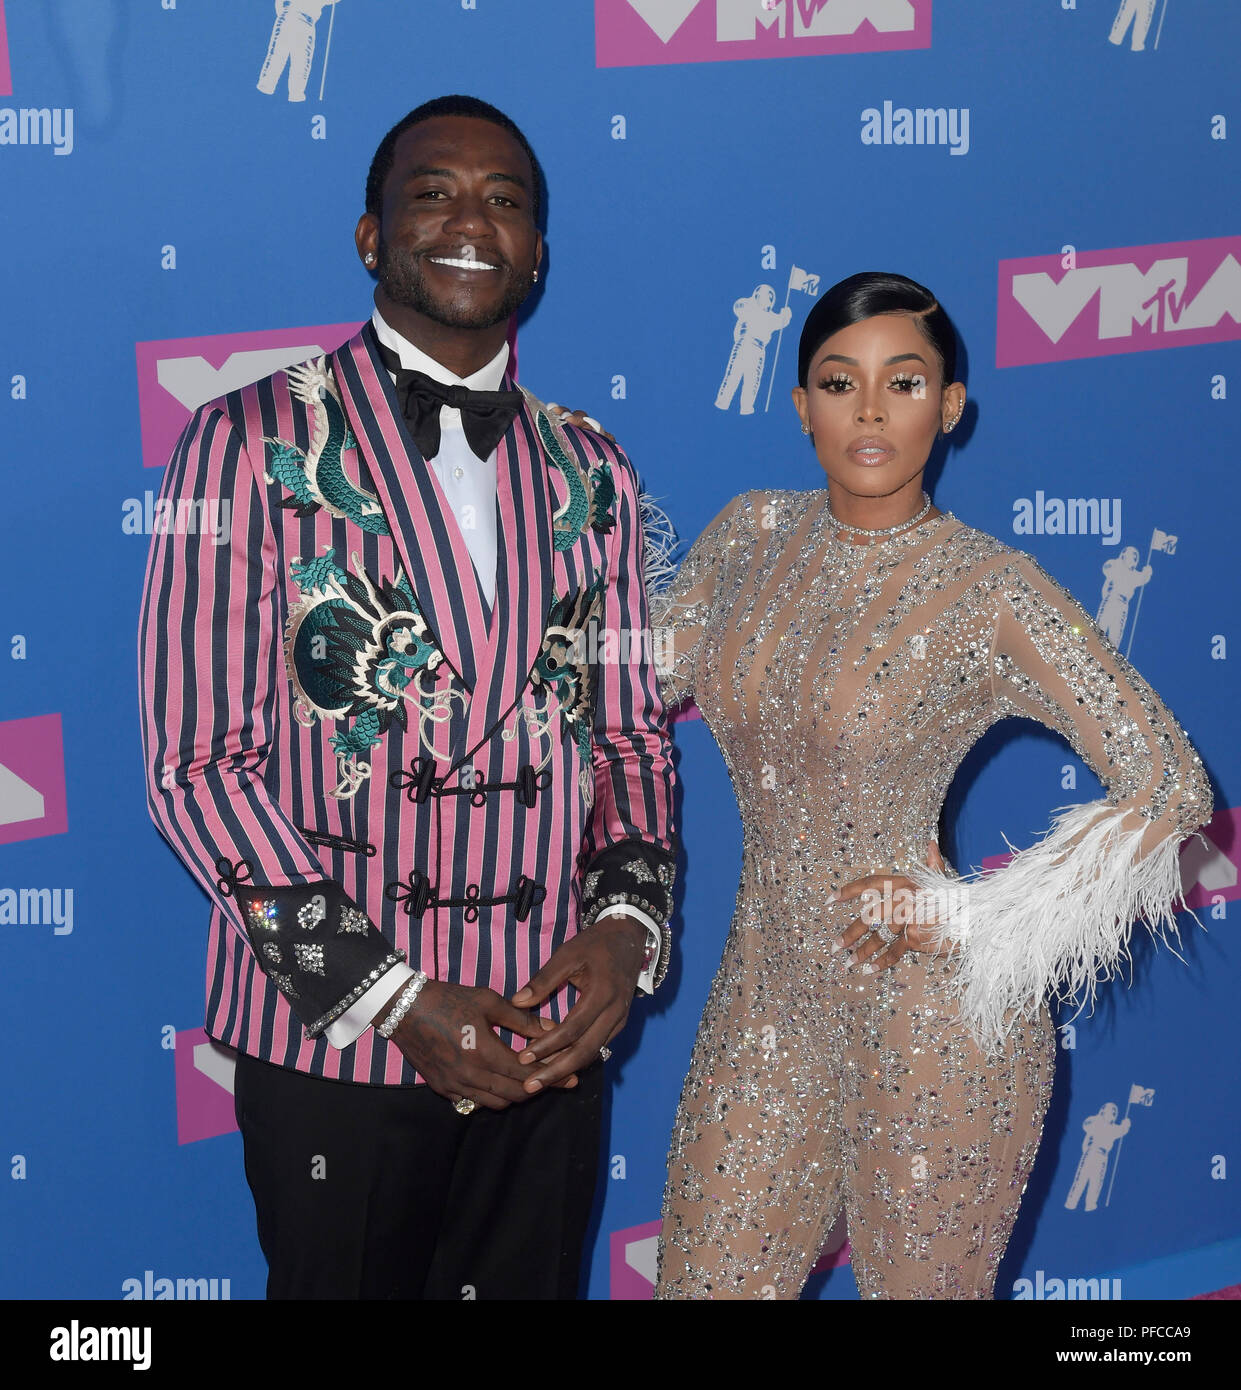 New York, NY, USA. 20th Aug, 2018. Gucci Mane and Keyshia Ka'Oir attend the  2018 MTV Music Awards at Radio City Music Hall on August 20, 2018 in New  York, NY. Credit: